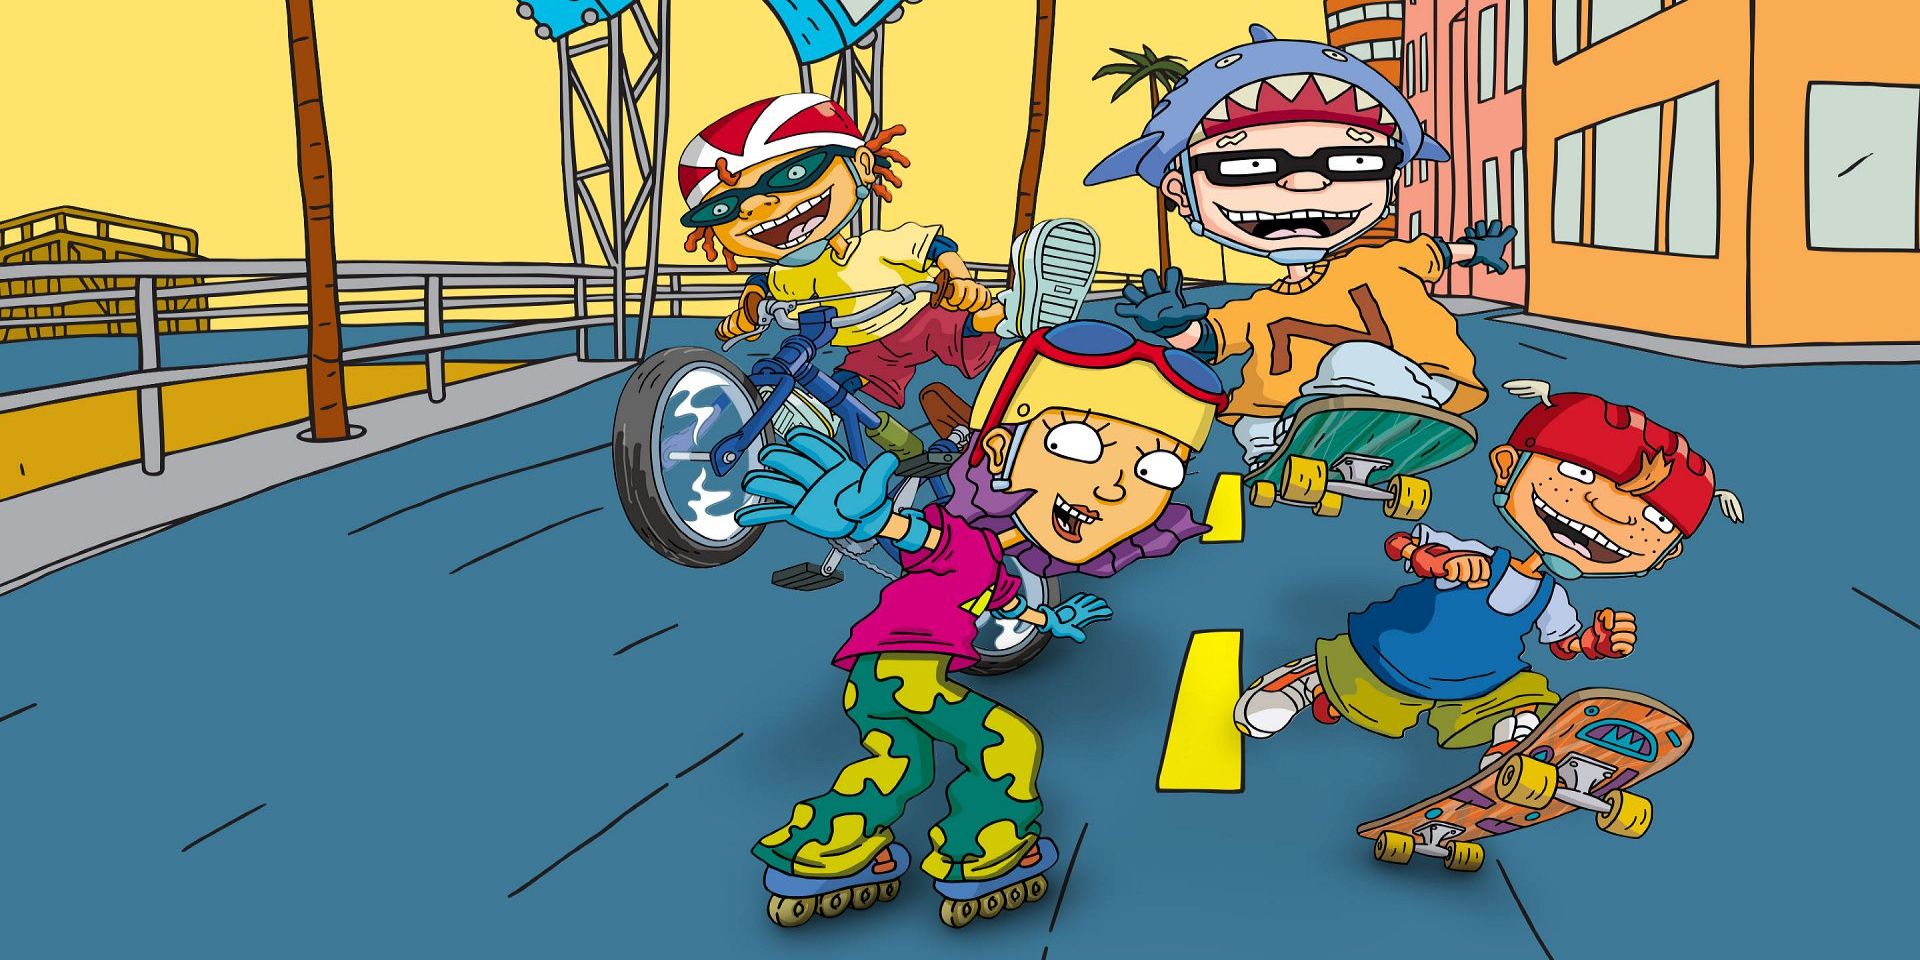 The main characters from Rocket Power.